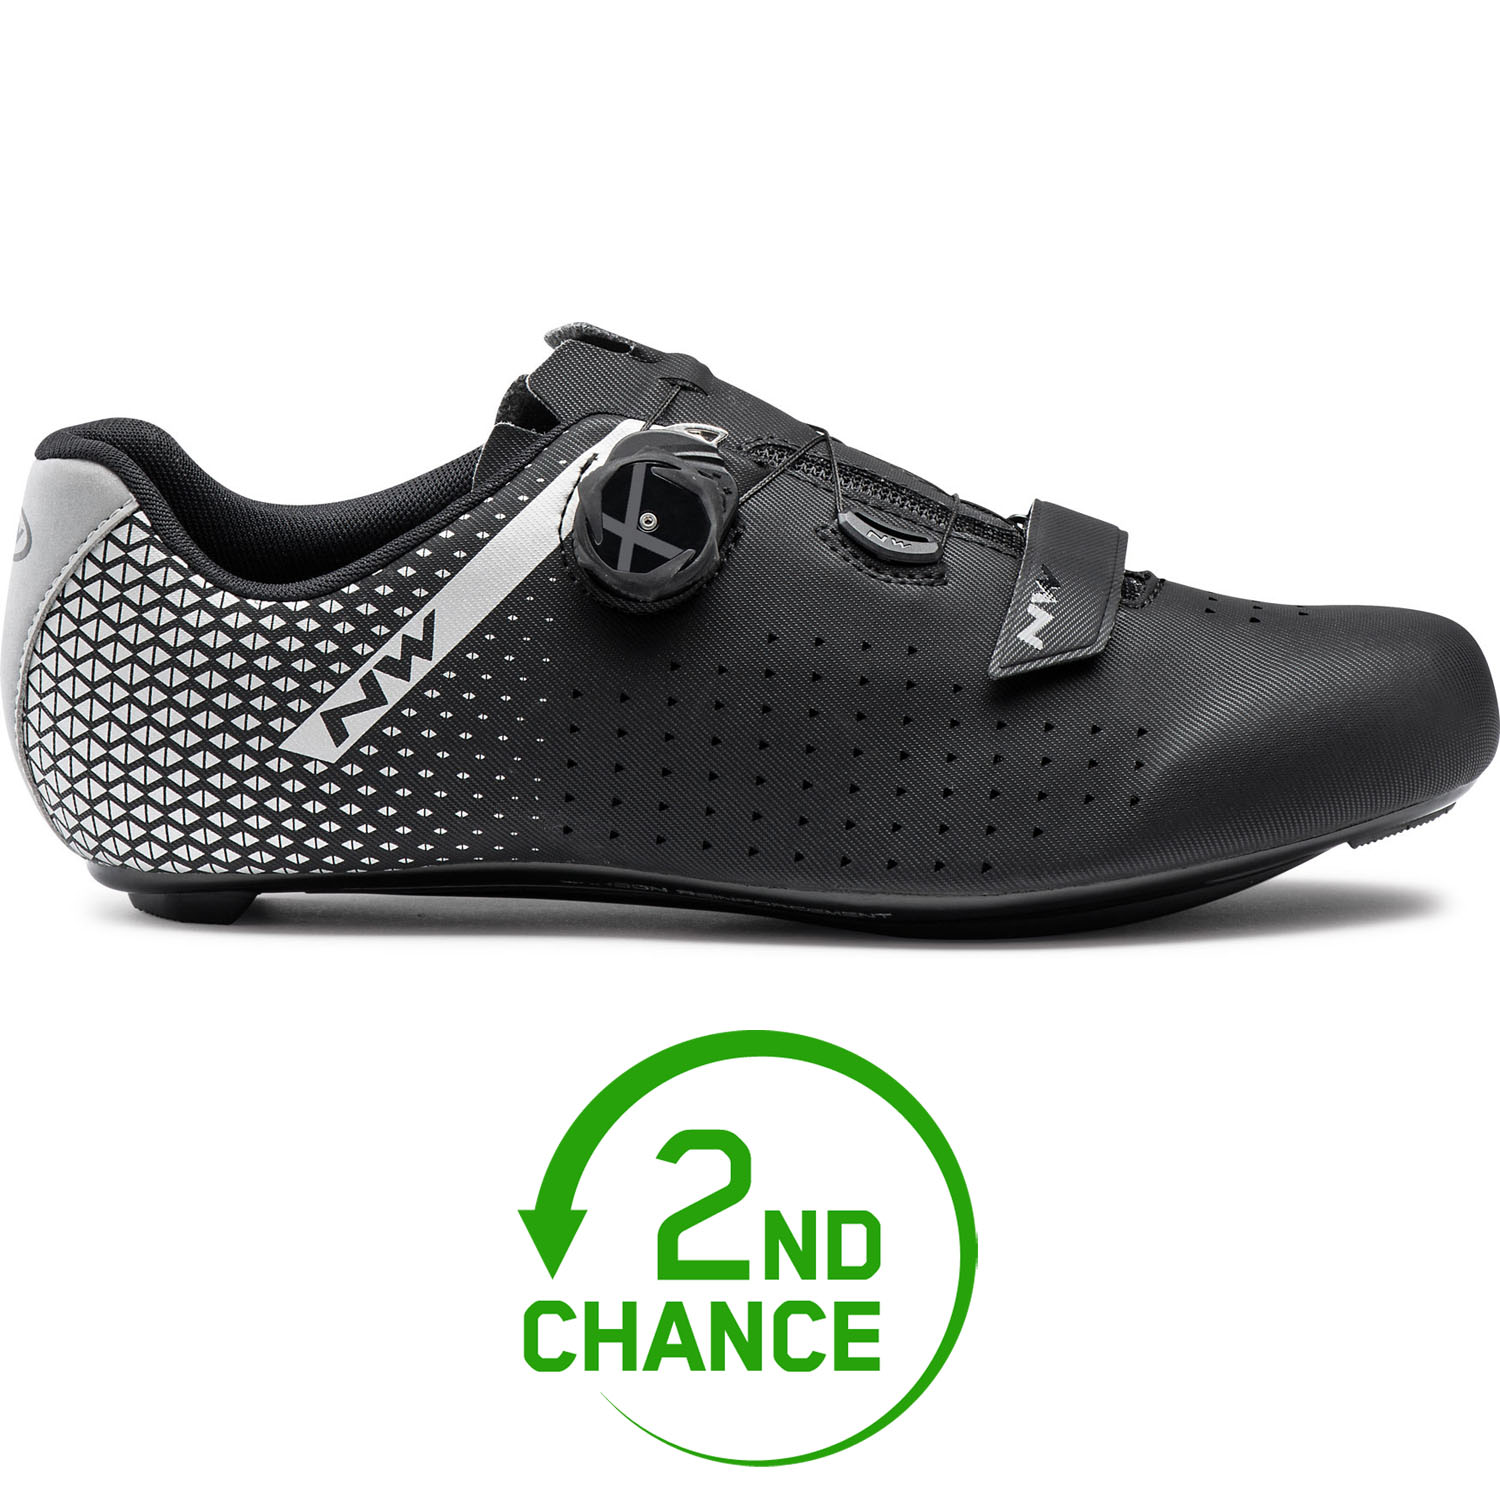 Picture of Northwave Core Plus 2 Road Shoe Wide Fit - black/silver 17 - 2nd Choice